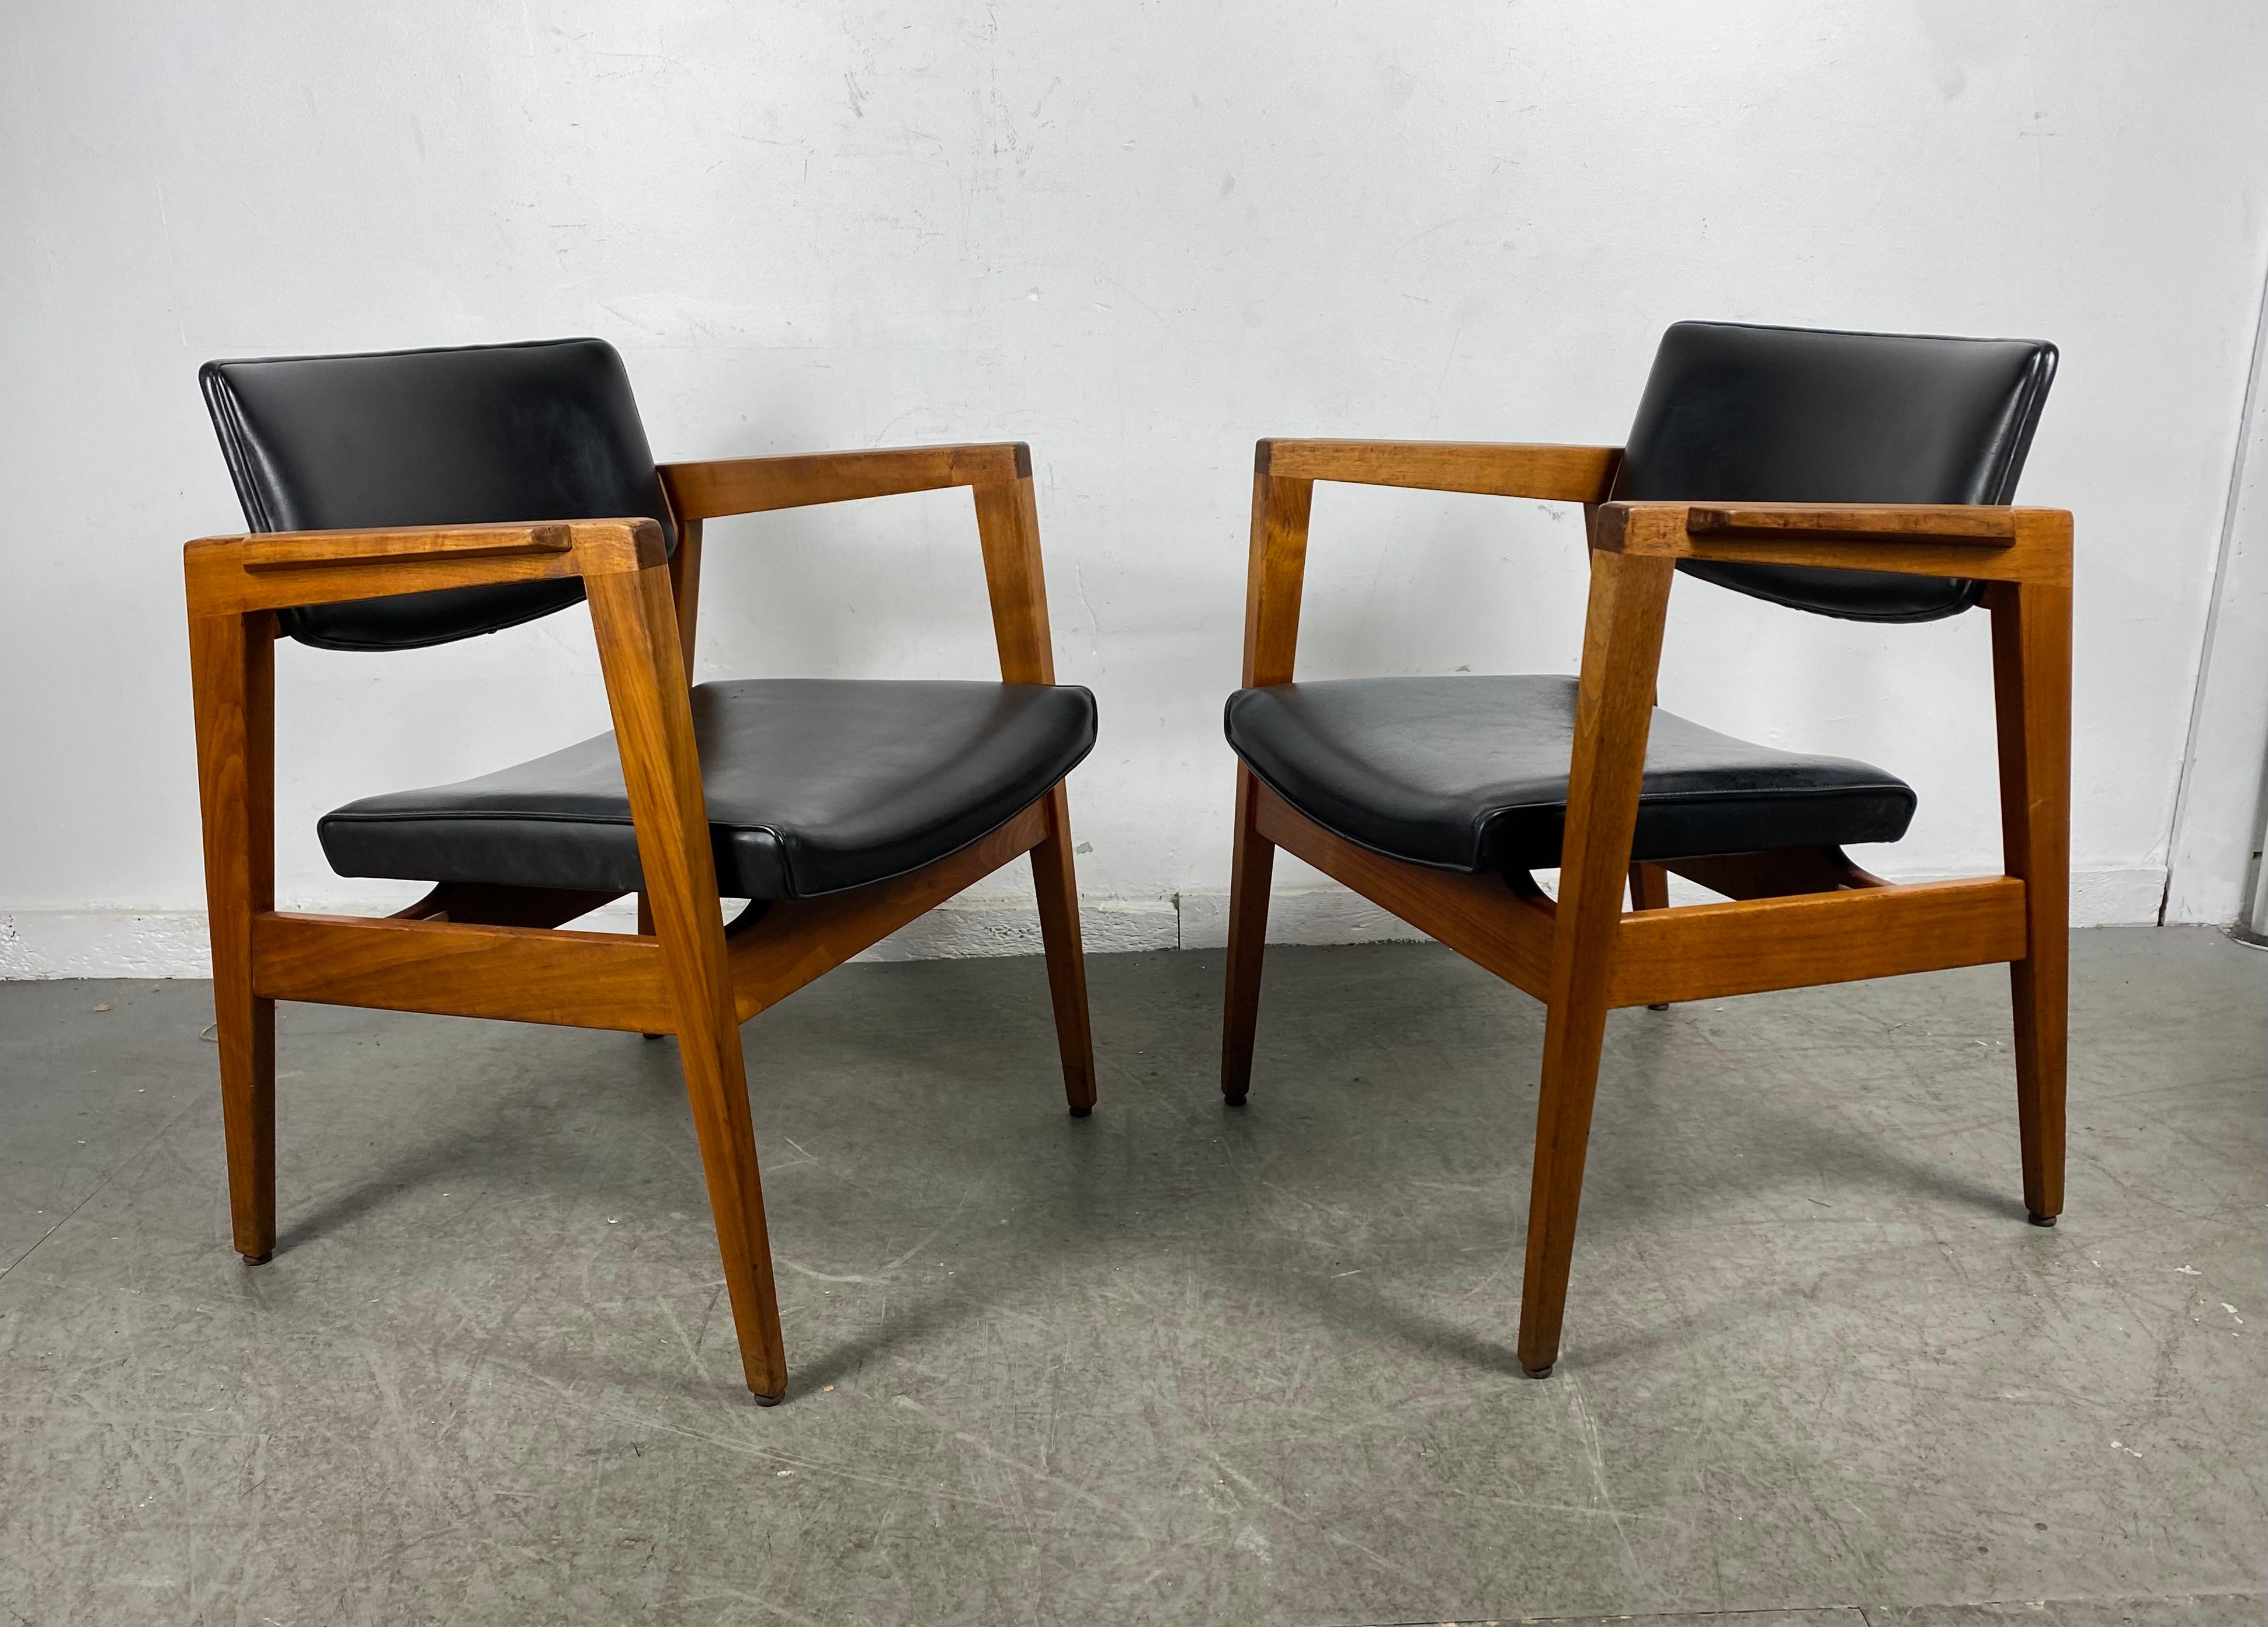 American Solid Walnut and Leather Lounge Chairs by Gunlocke , Jens Risom Style